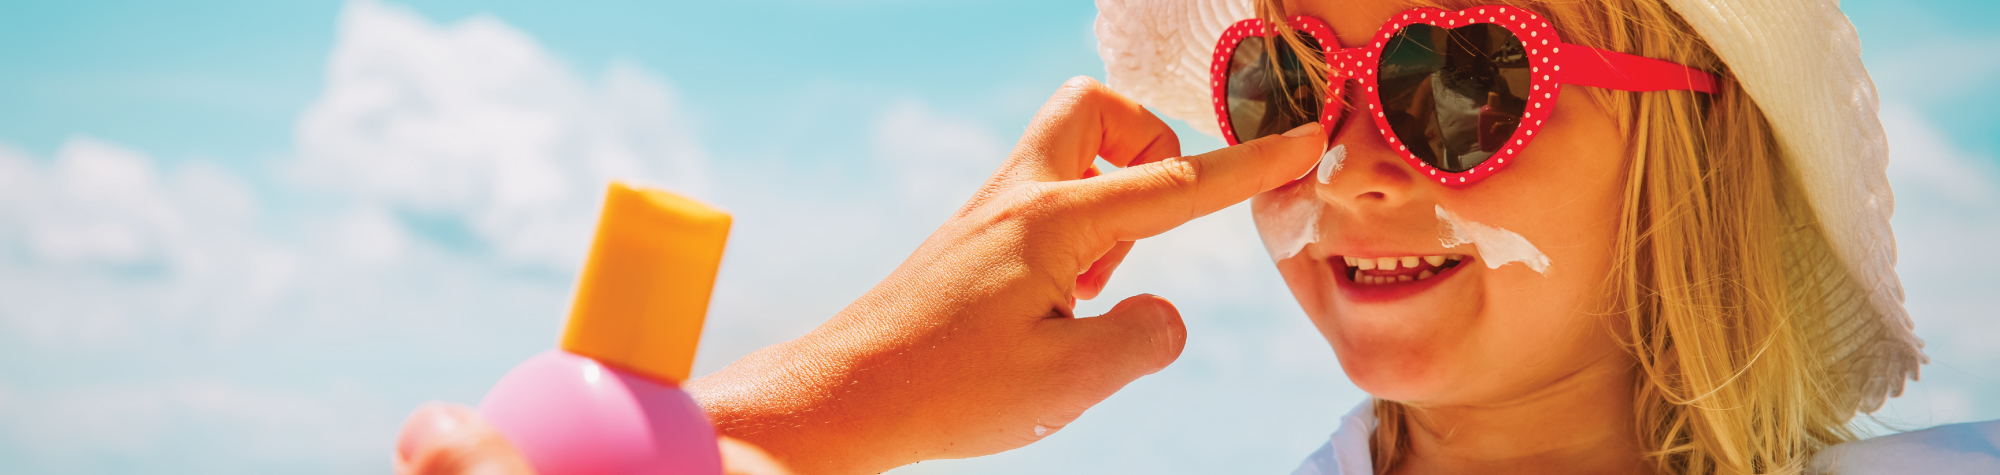 Sun Safety Best Practices: Selecting a Sunscreen, Wearing Protective Clothing, and More